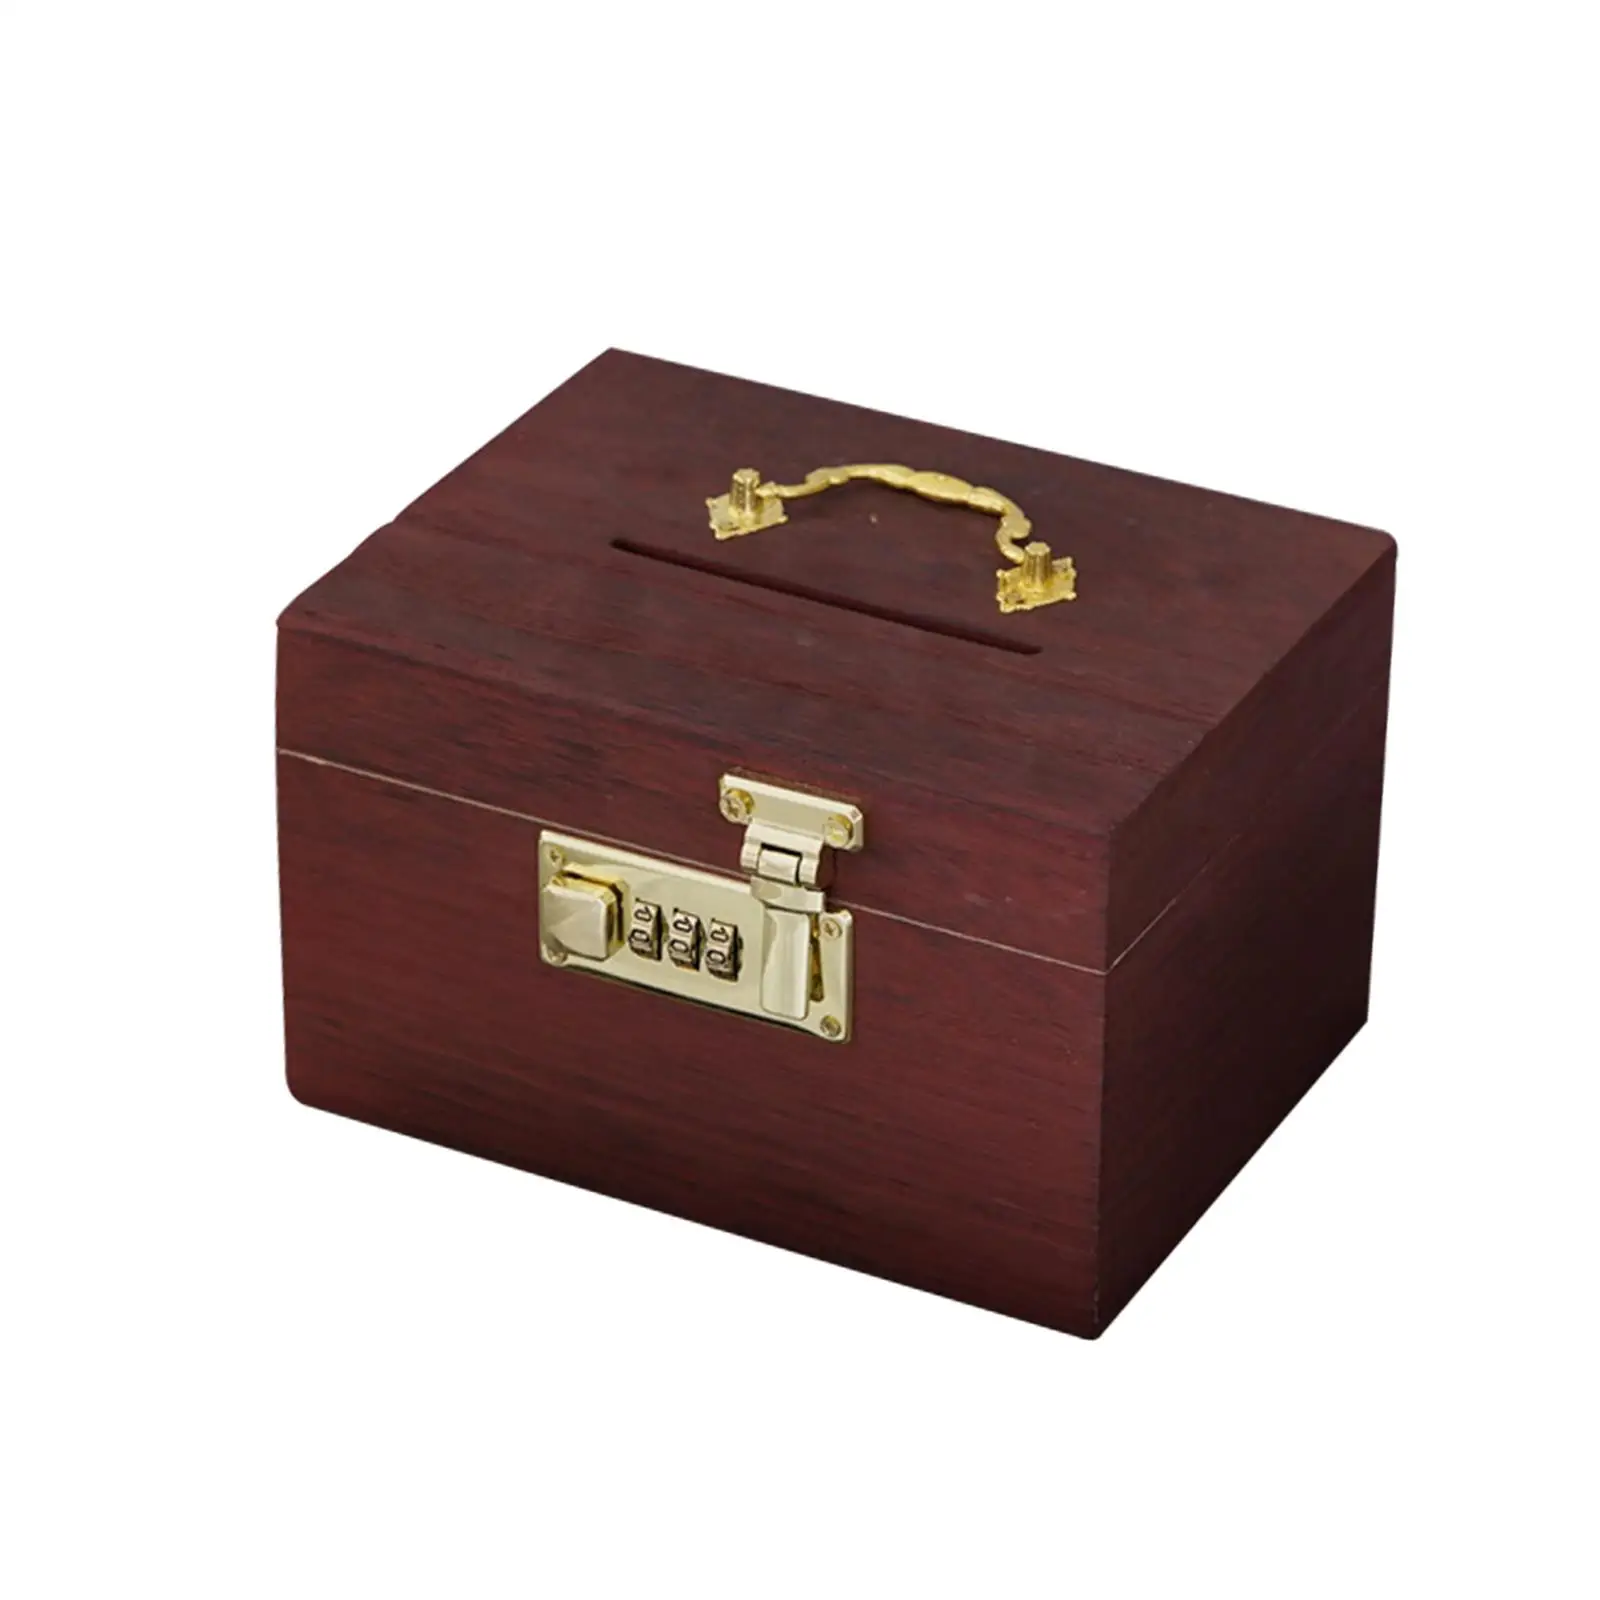 Vintage Style Wooden Box Piggy Bank Organizer Password Lock Collection Treasure Chest Treasure Box for Kids Gifts Souvenir